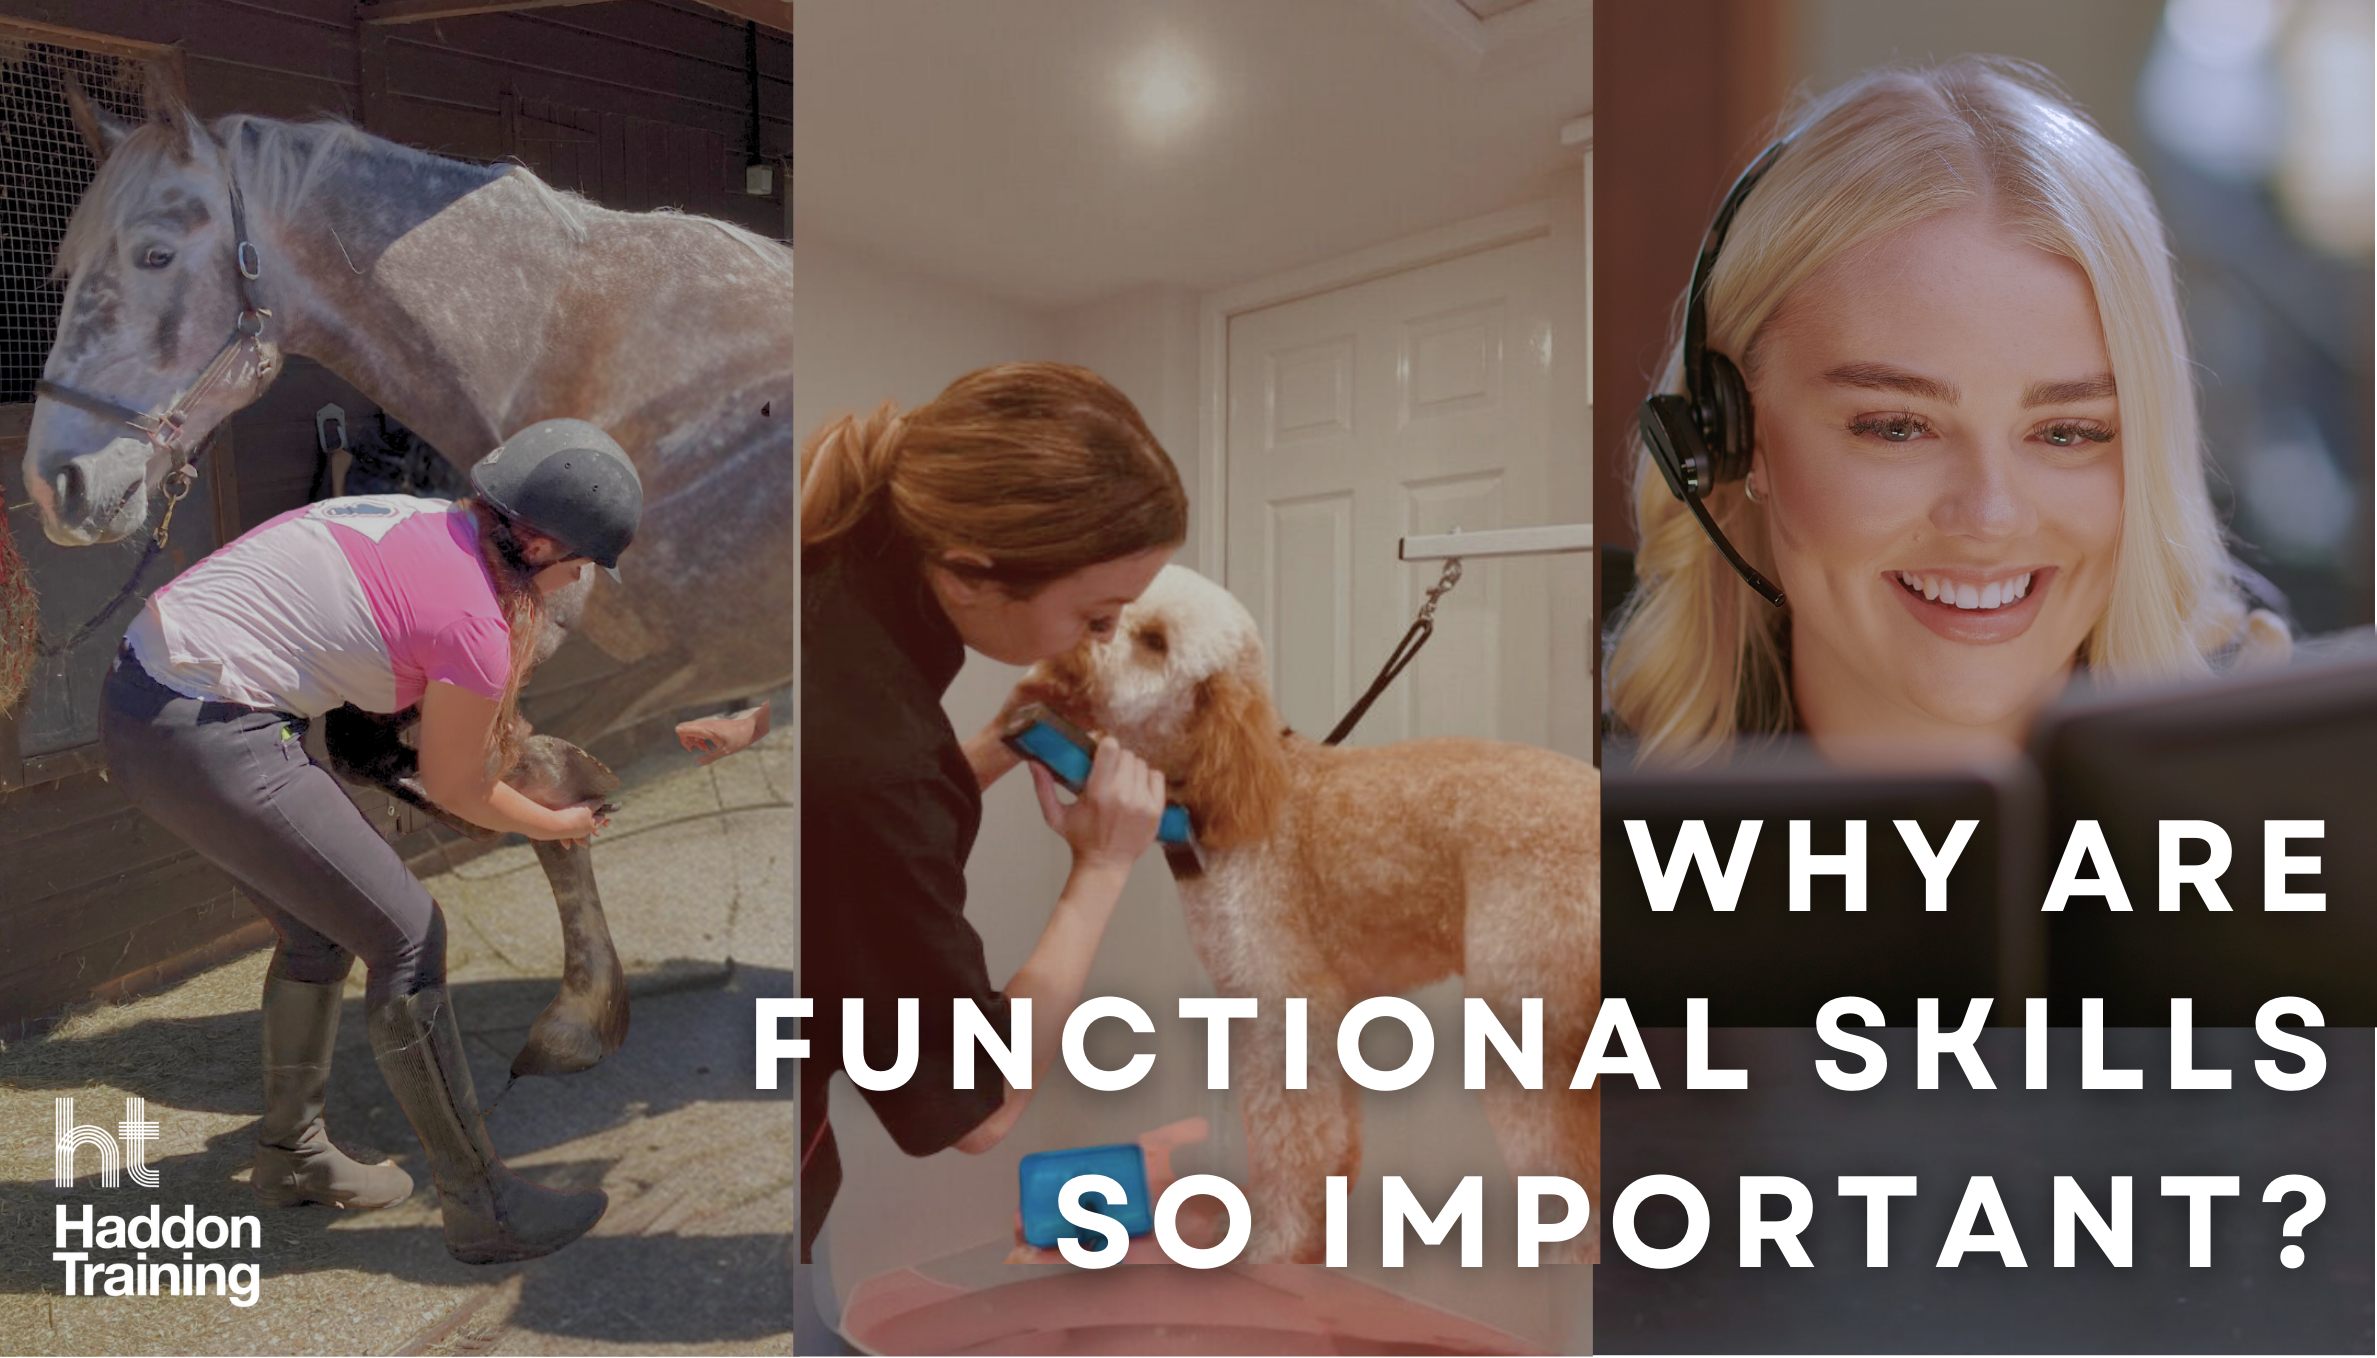 Why are functional skills so important?